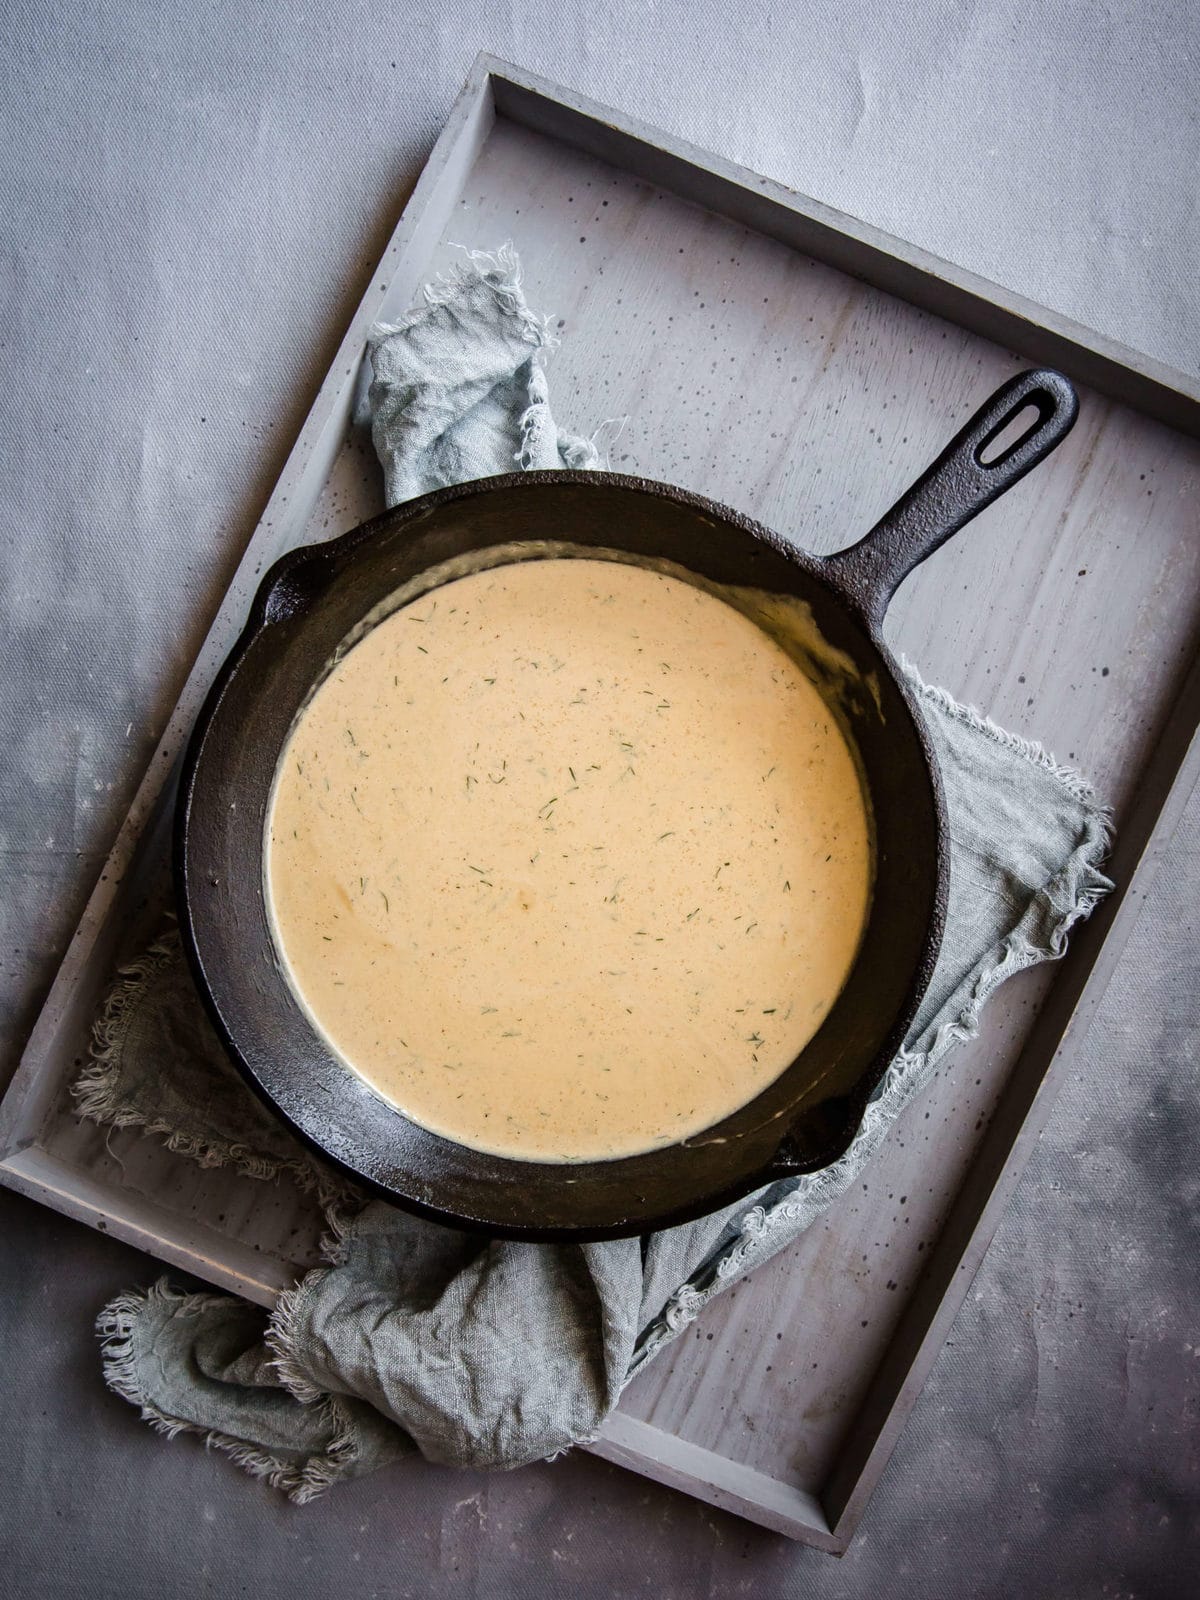 A cast iron skillet full of creamy sour cream dill sauce served on a wooden tray